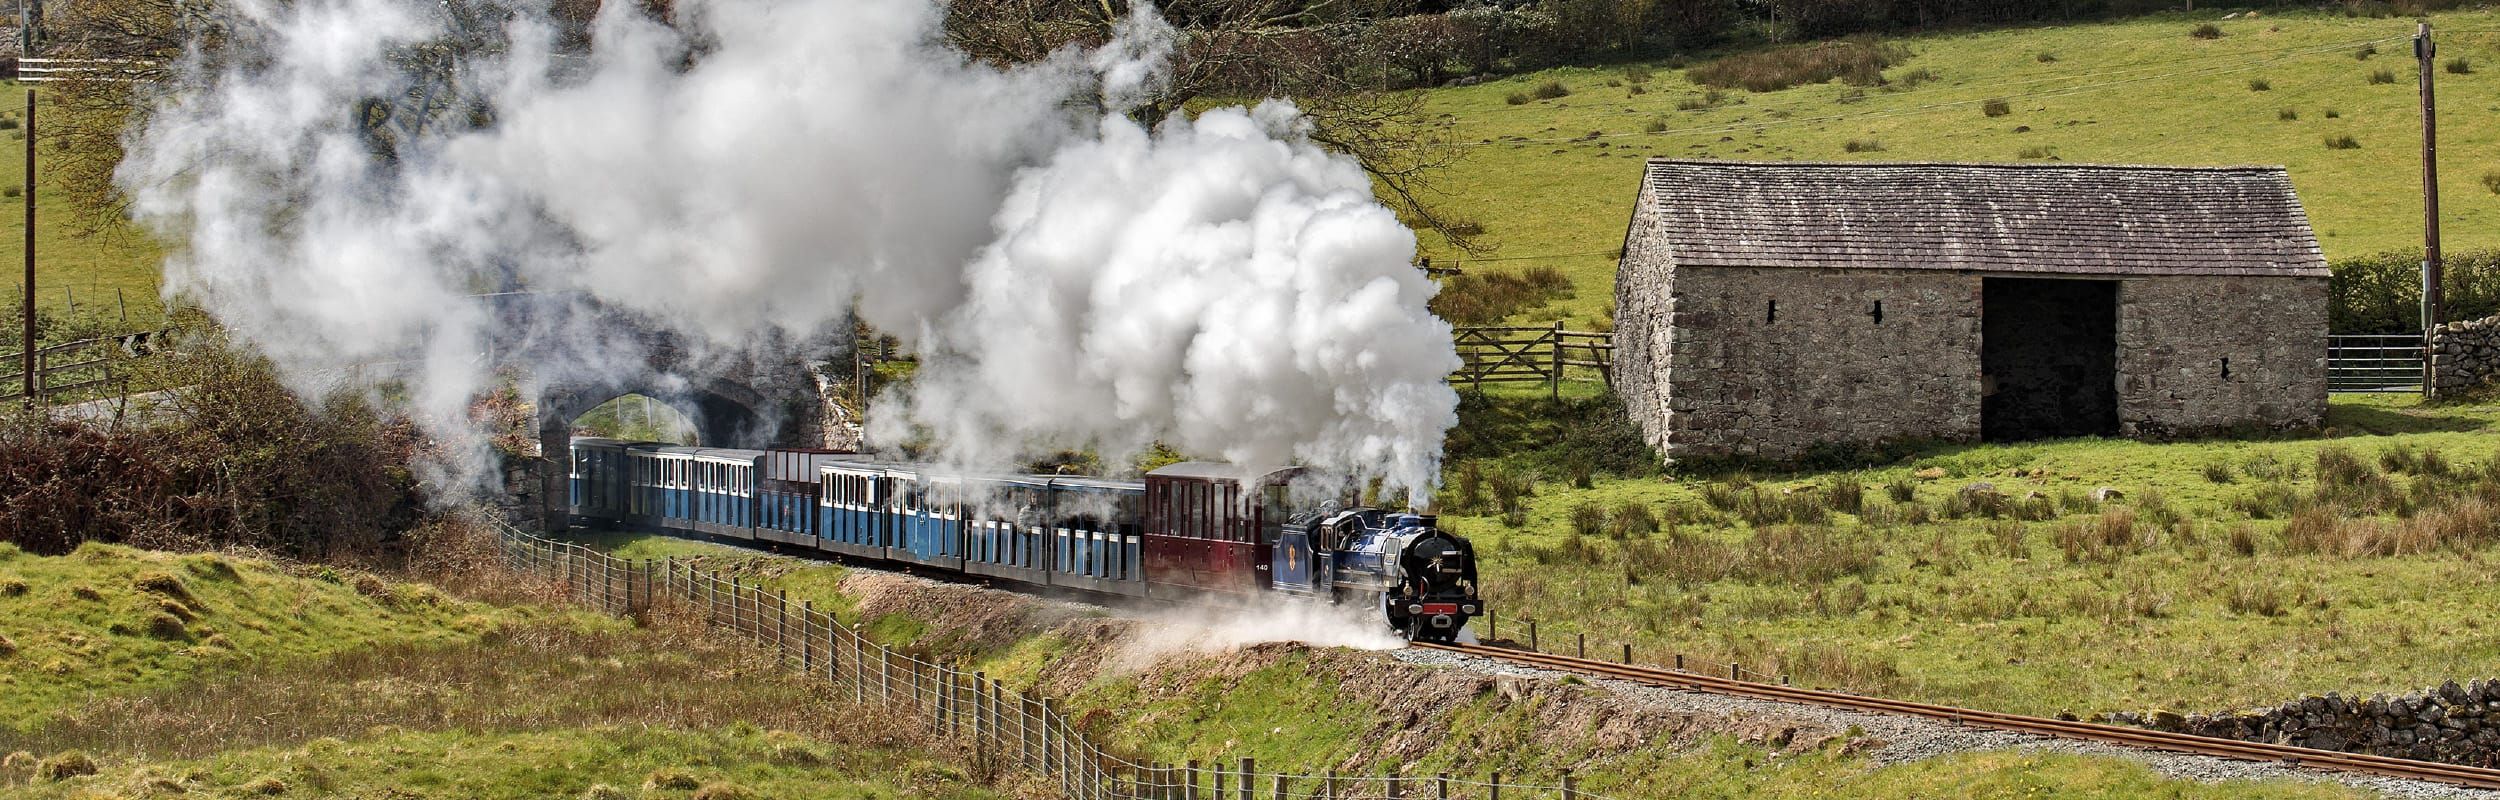 Whillan Beck, a heritage locomotive at the Ravenglass and Eskdale railway hauling a train through a cloud of steam